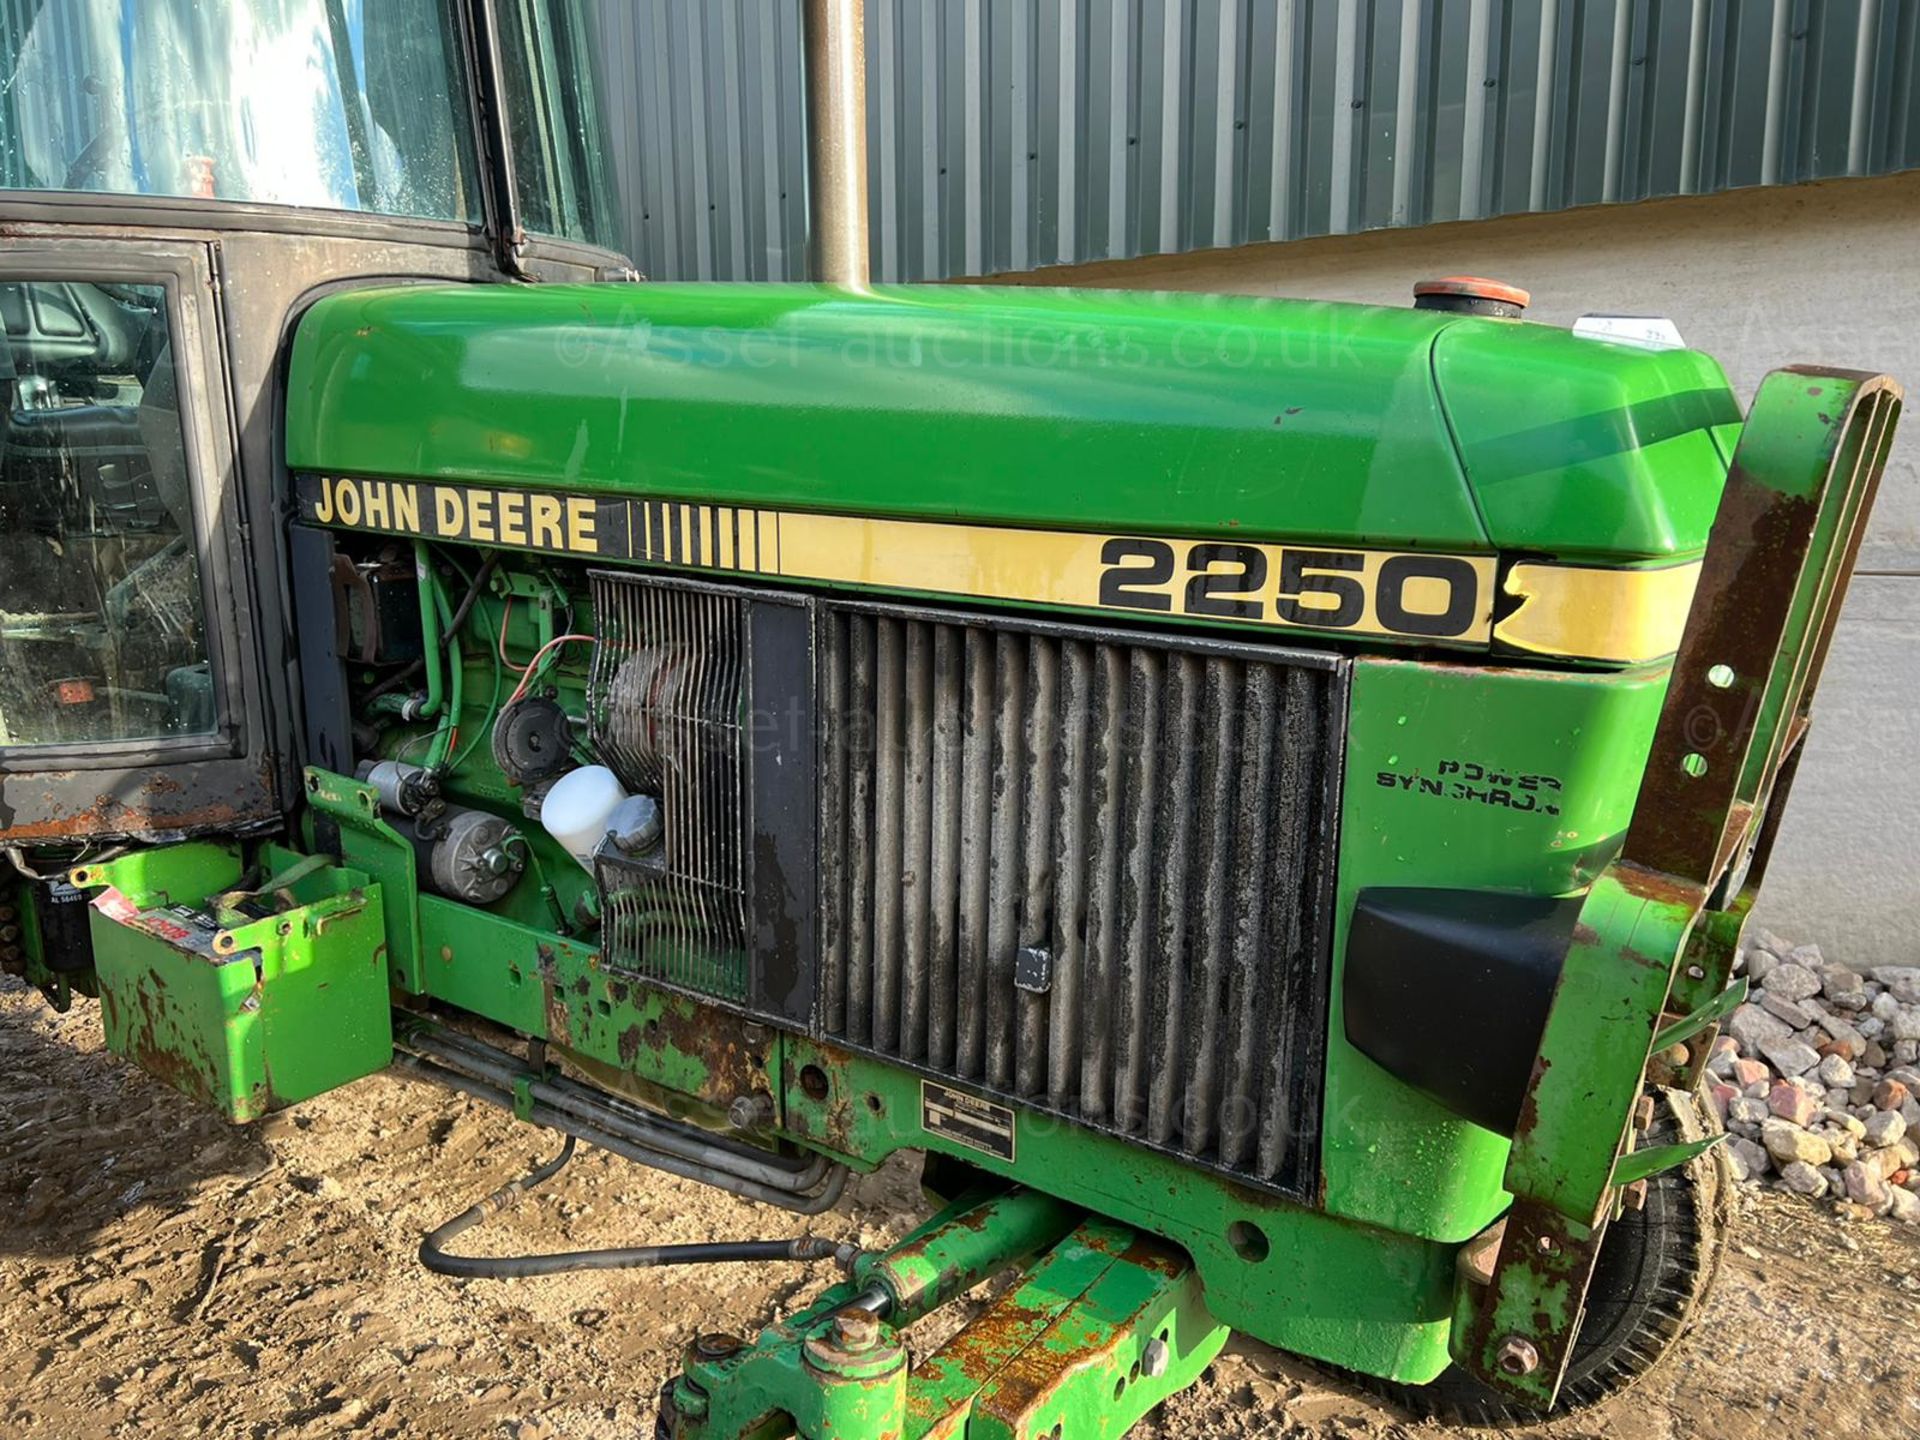 JOHN DEERE 2250 62hp TRACTOR, RUNS AND DRIVES, CABBED, 2 SPOOLS *PLUS VAT* - Image 11 of 11